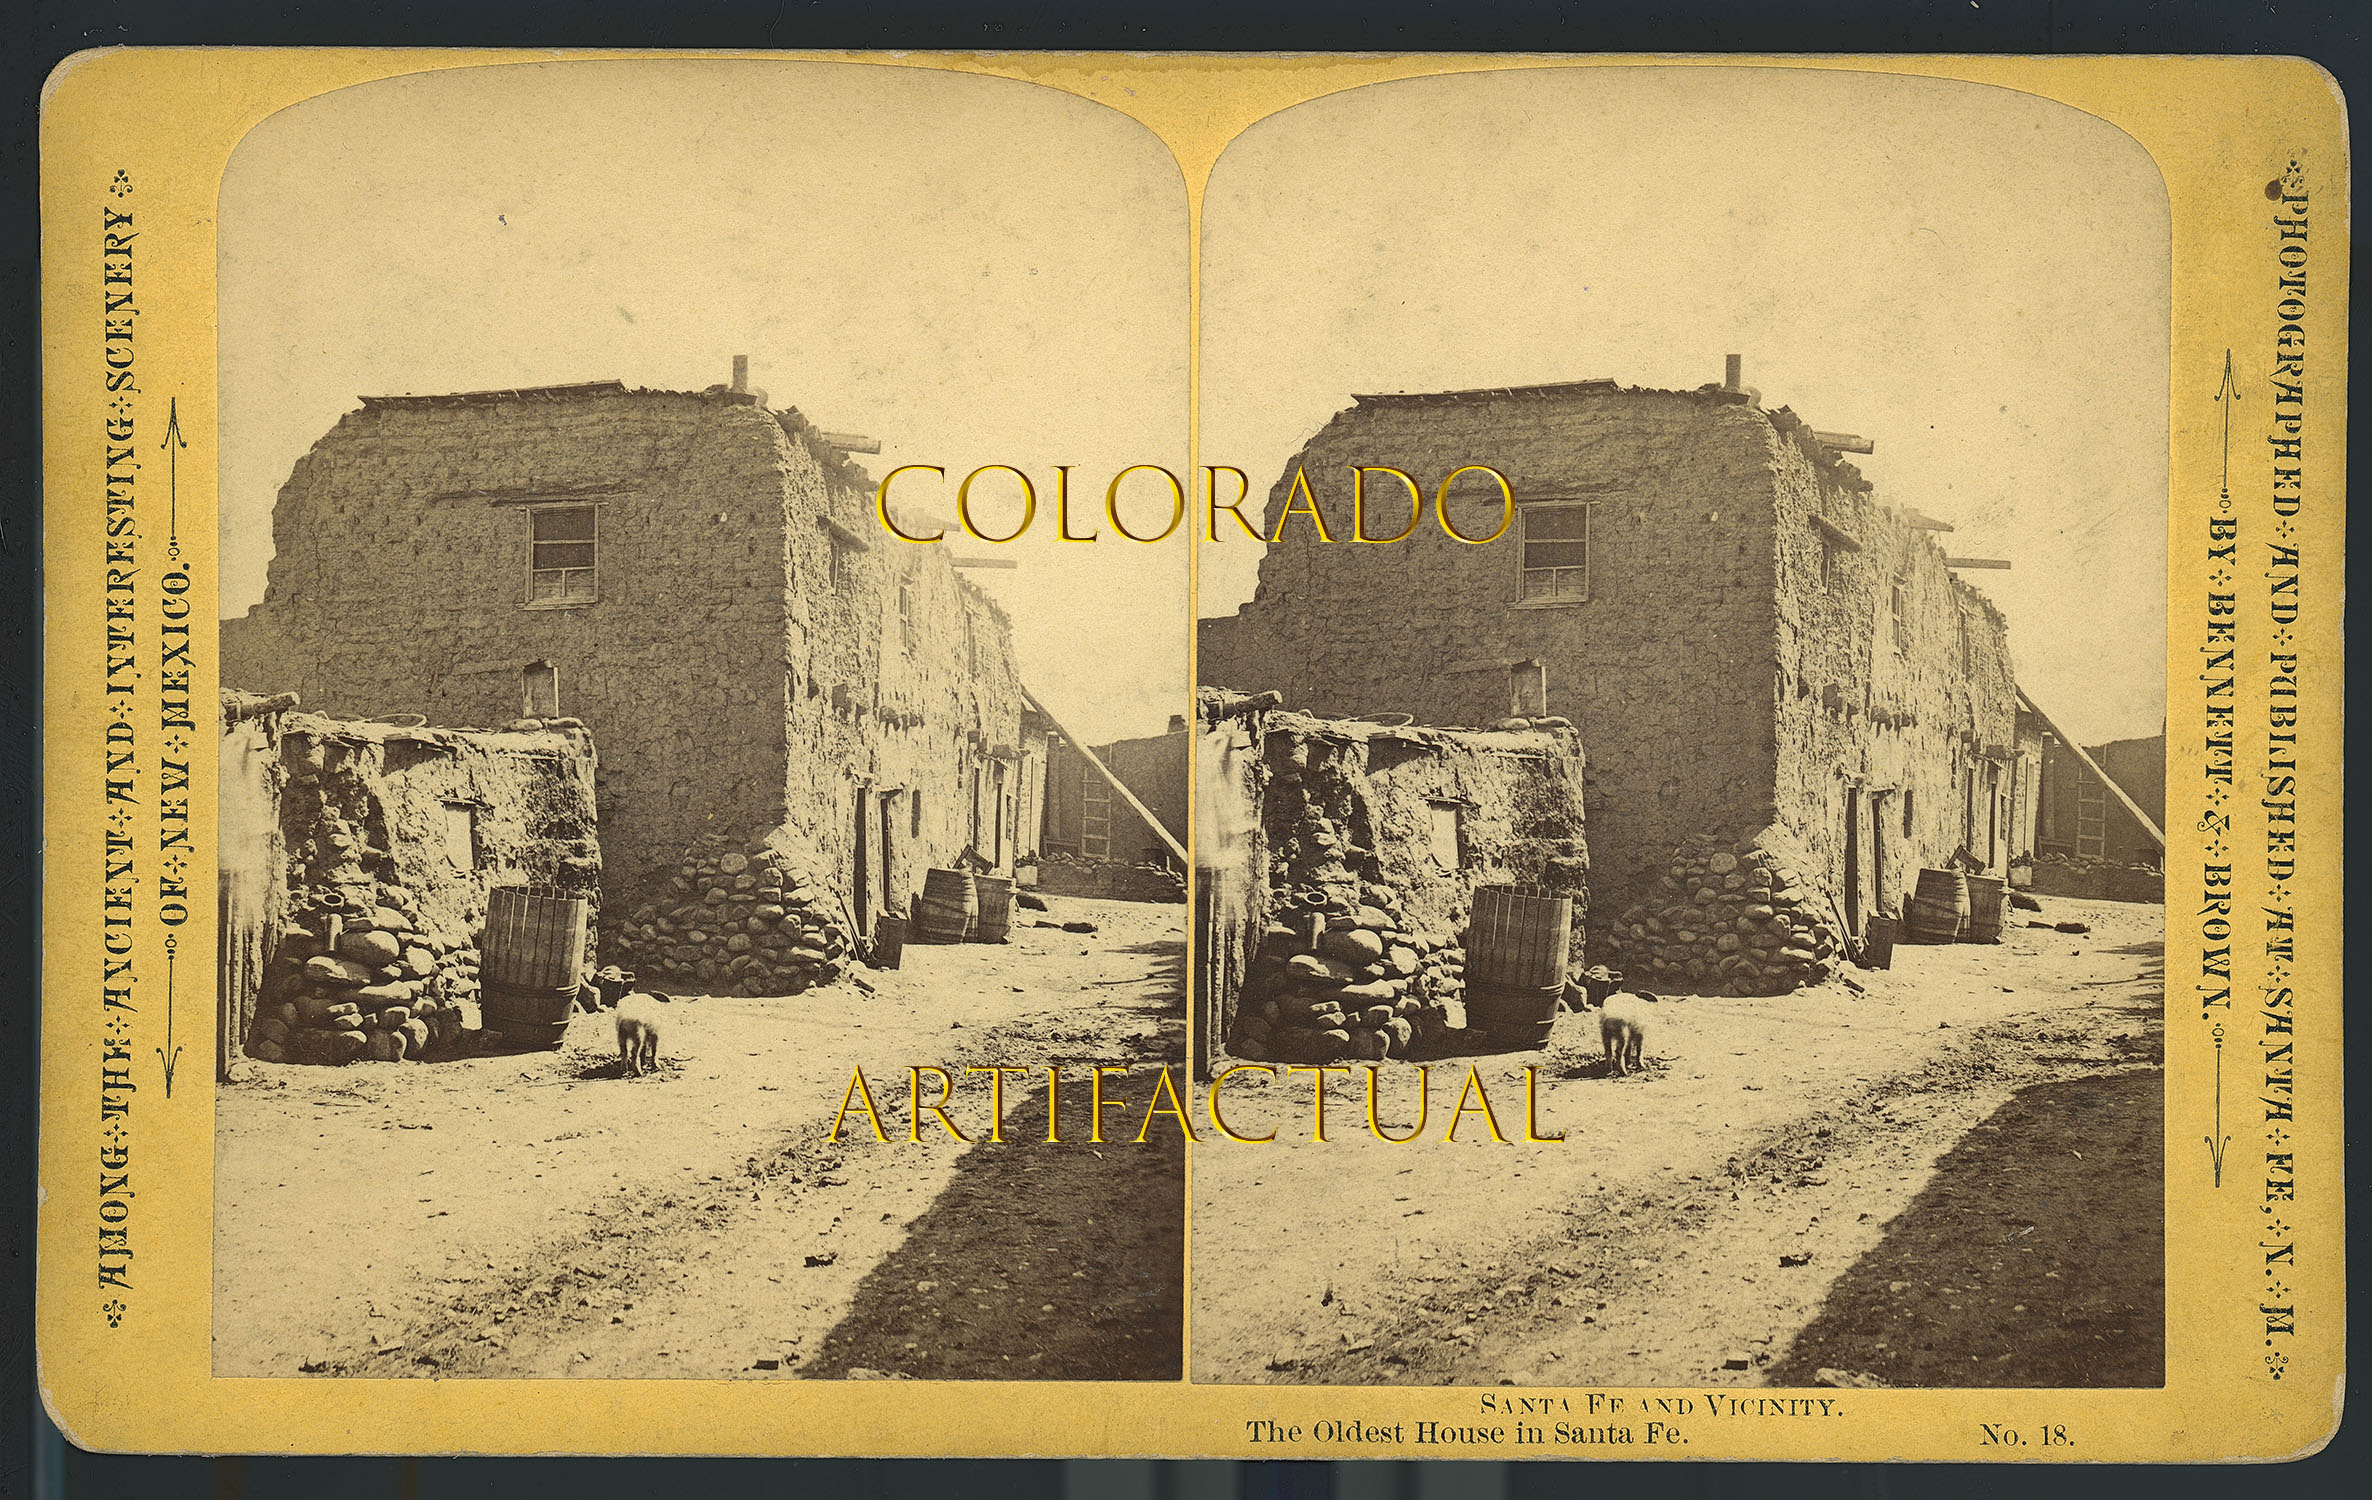 OLDEST HOUSE IN SANTA FE, NEW MEXICO TERRITORY, W. Henry Brown, Photographer, Stereoview Image #18